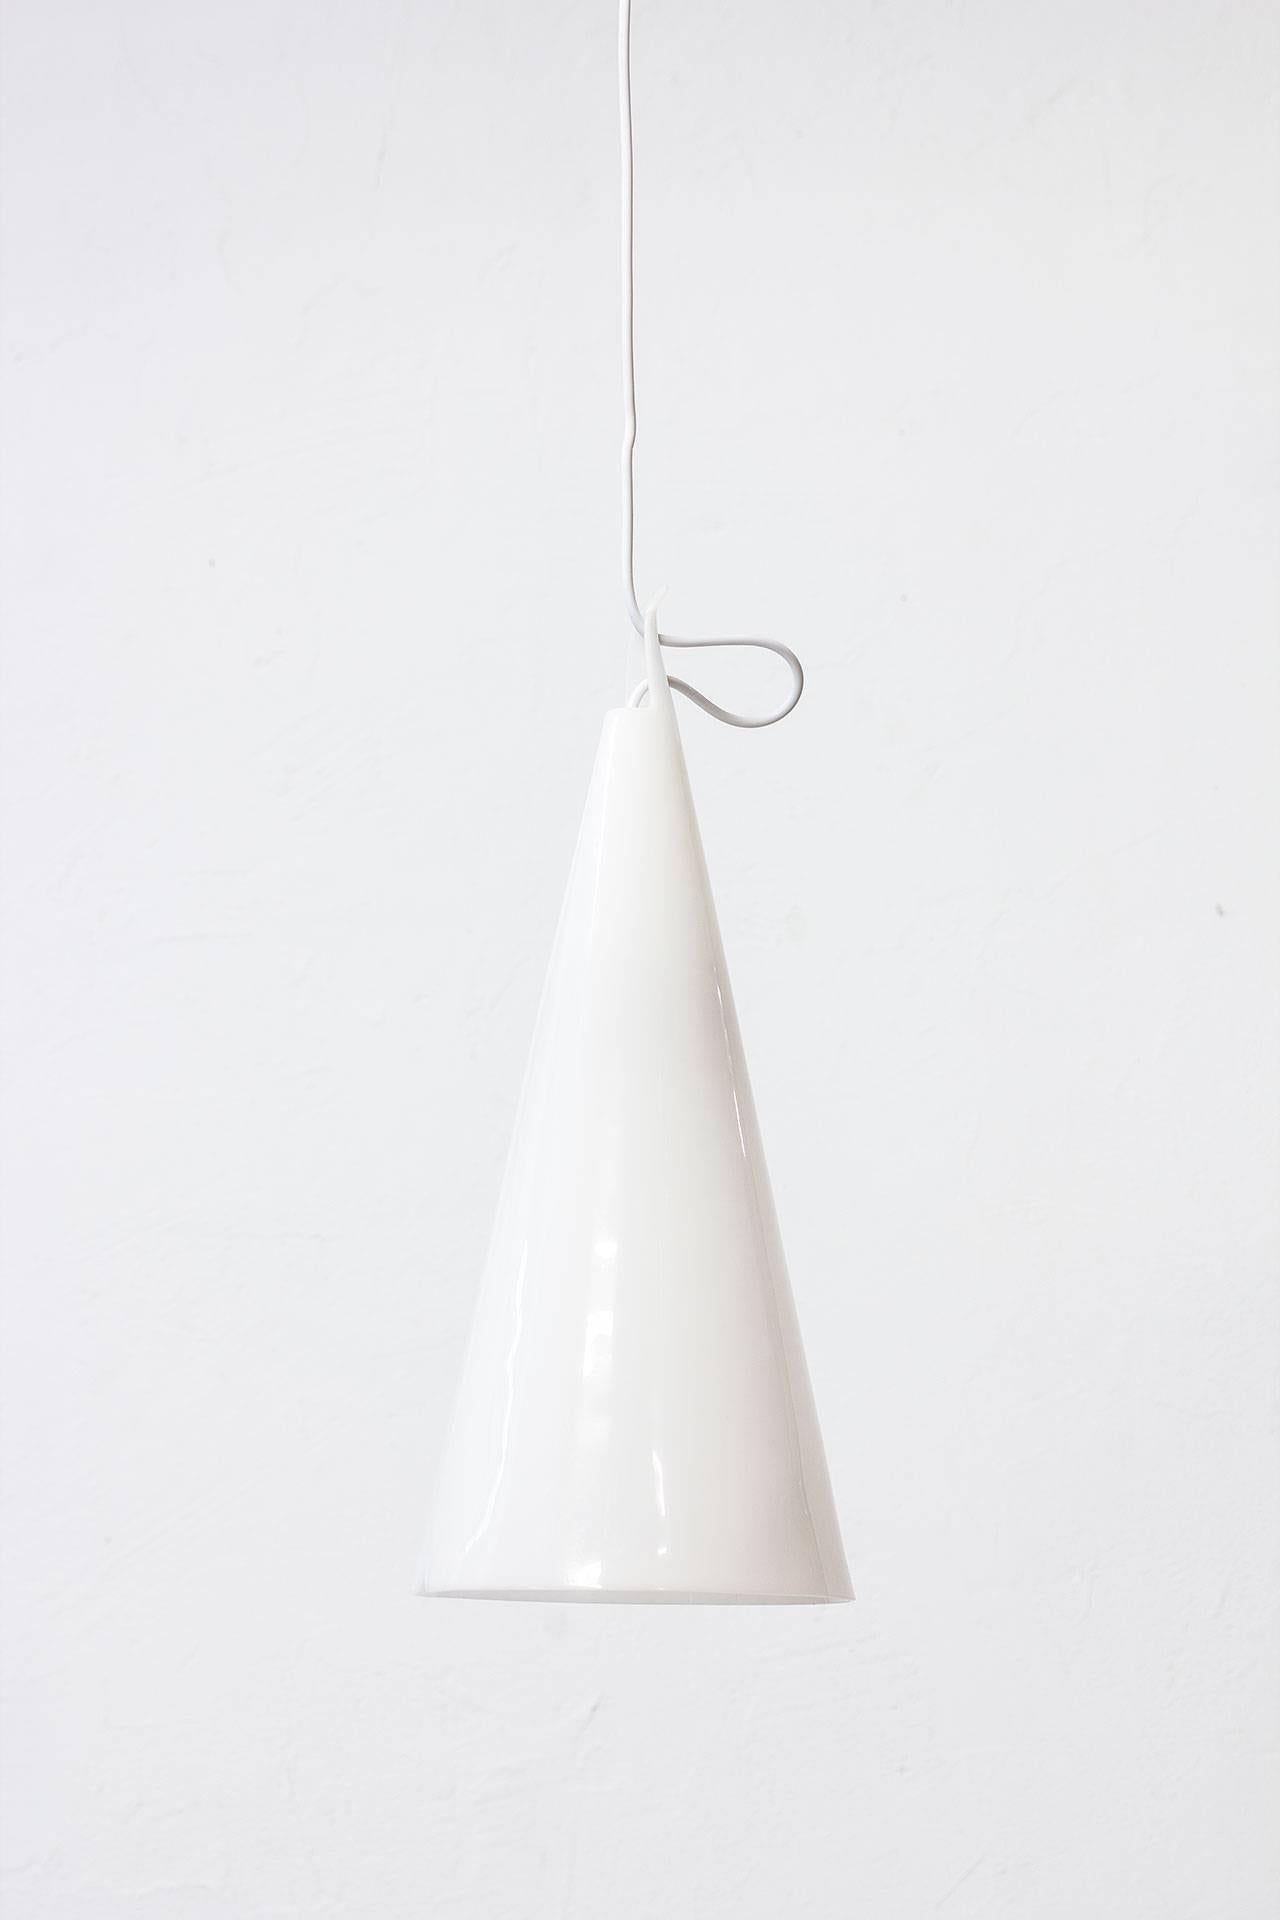 Model 181, aka Struten pendant lamp designed by Hans Bergström for his own company Ateljé Lyktan, Sweden in 1954. Minimalist lamp in acrylic awarded Gold Medal at the 10th Triennale di Milano in 1954.